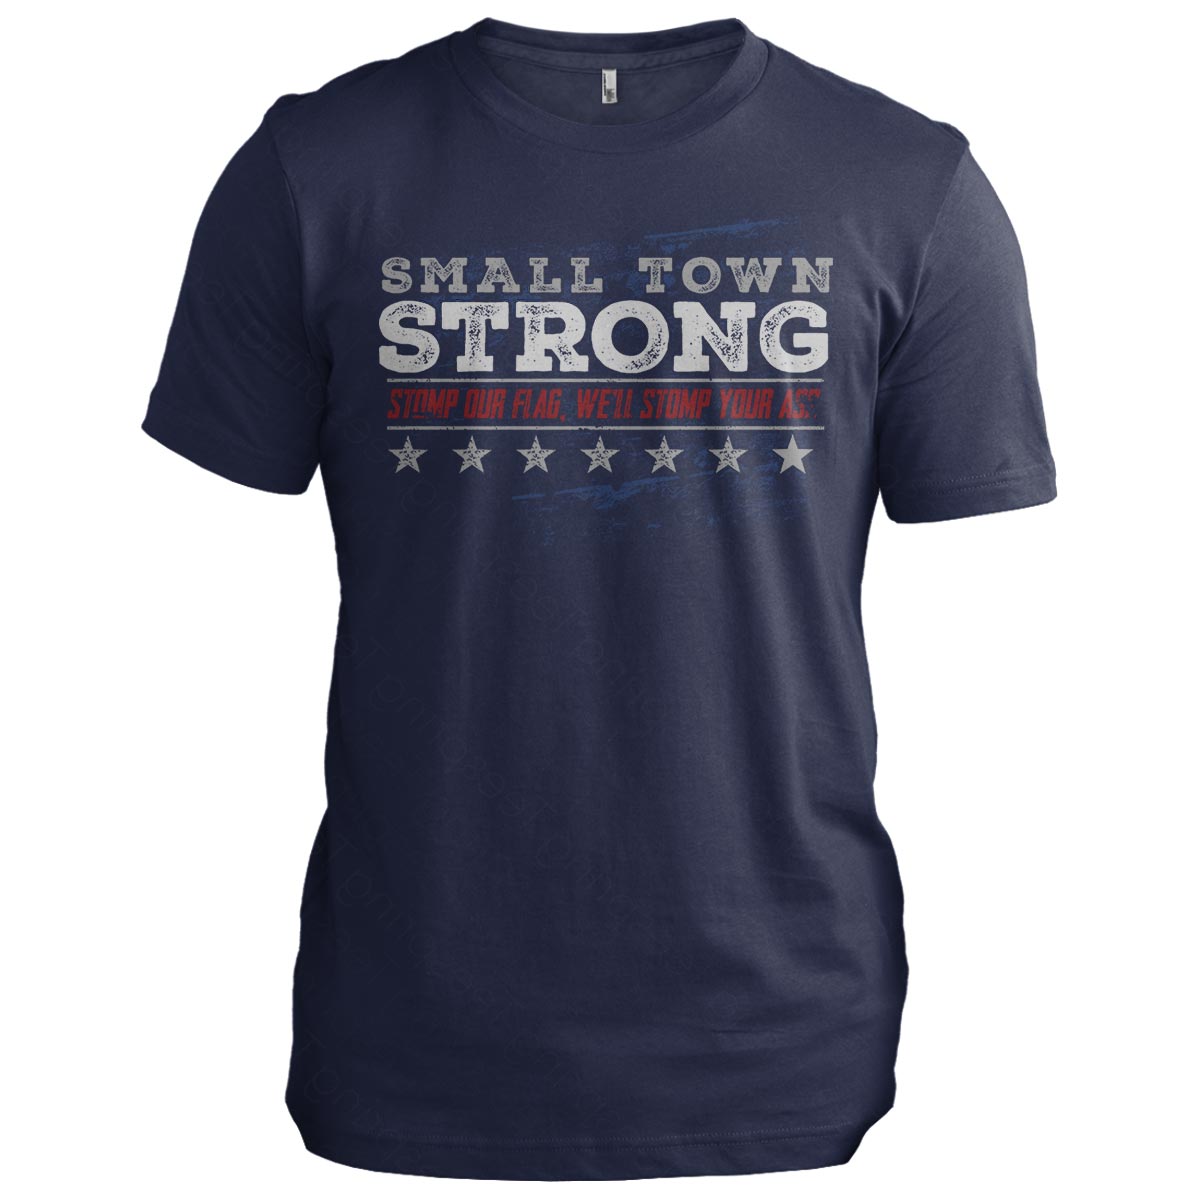 Small Town Strong: Stomp our flag... - 1 Nation Design